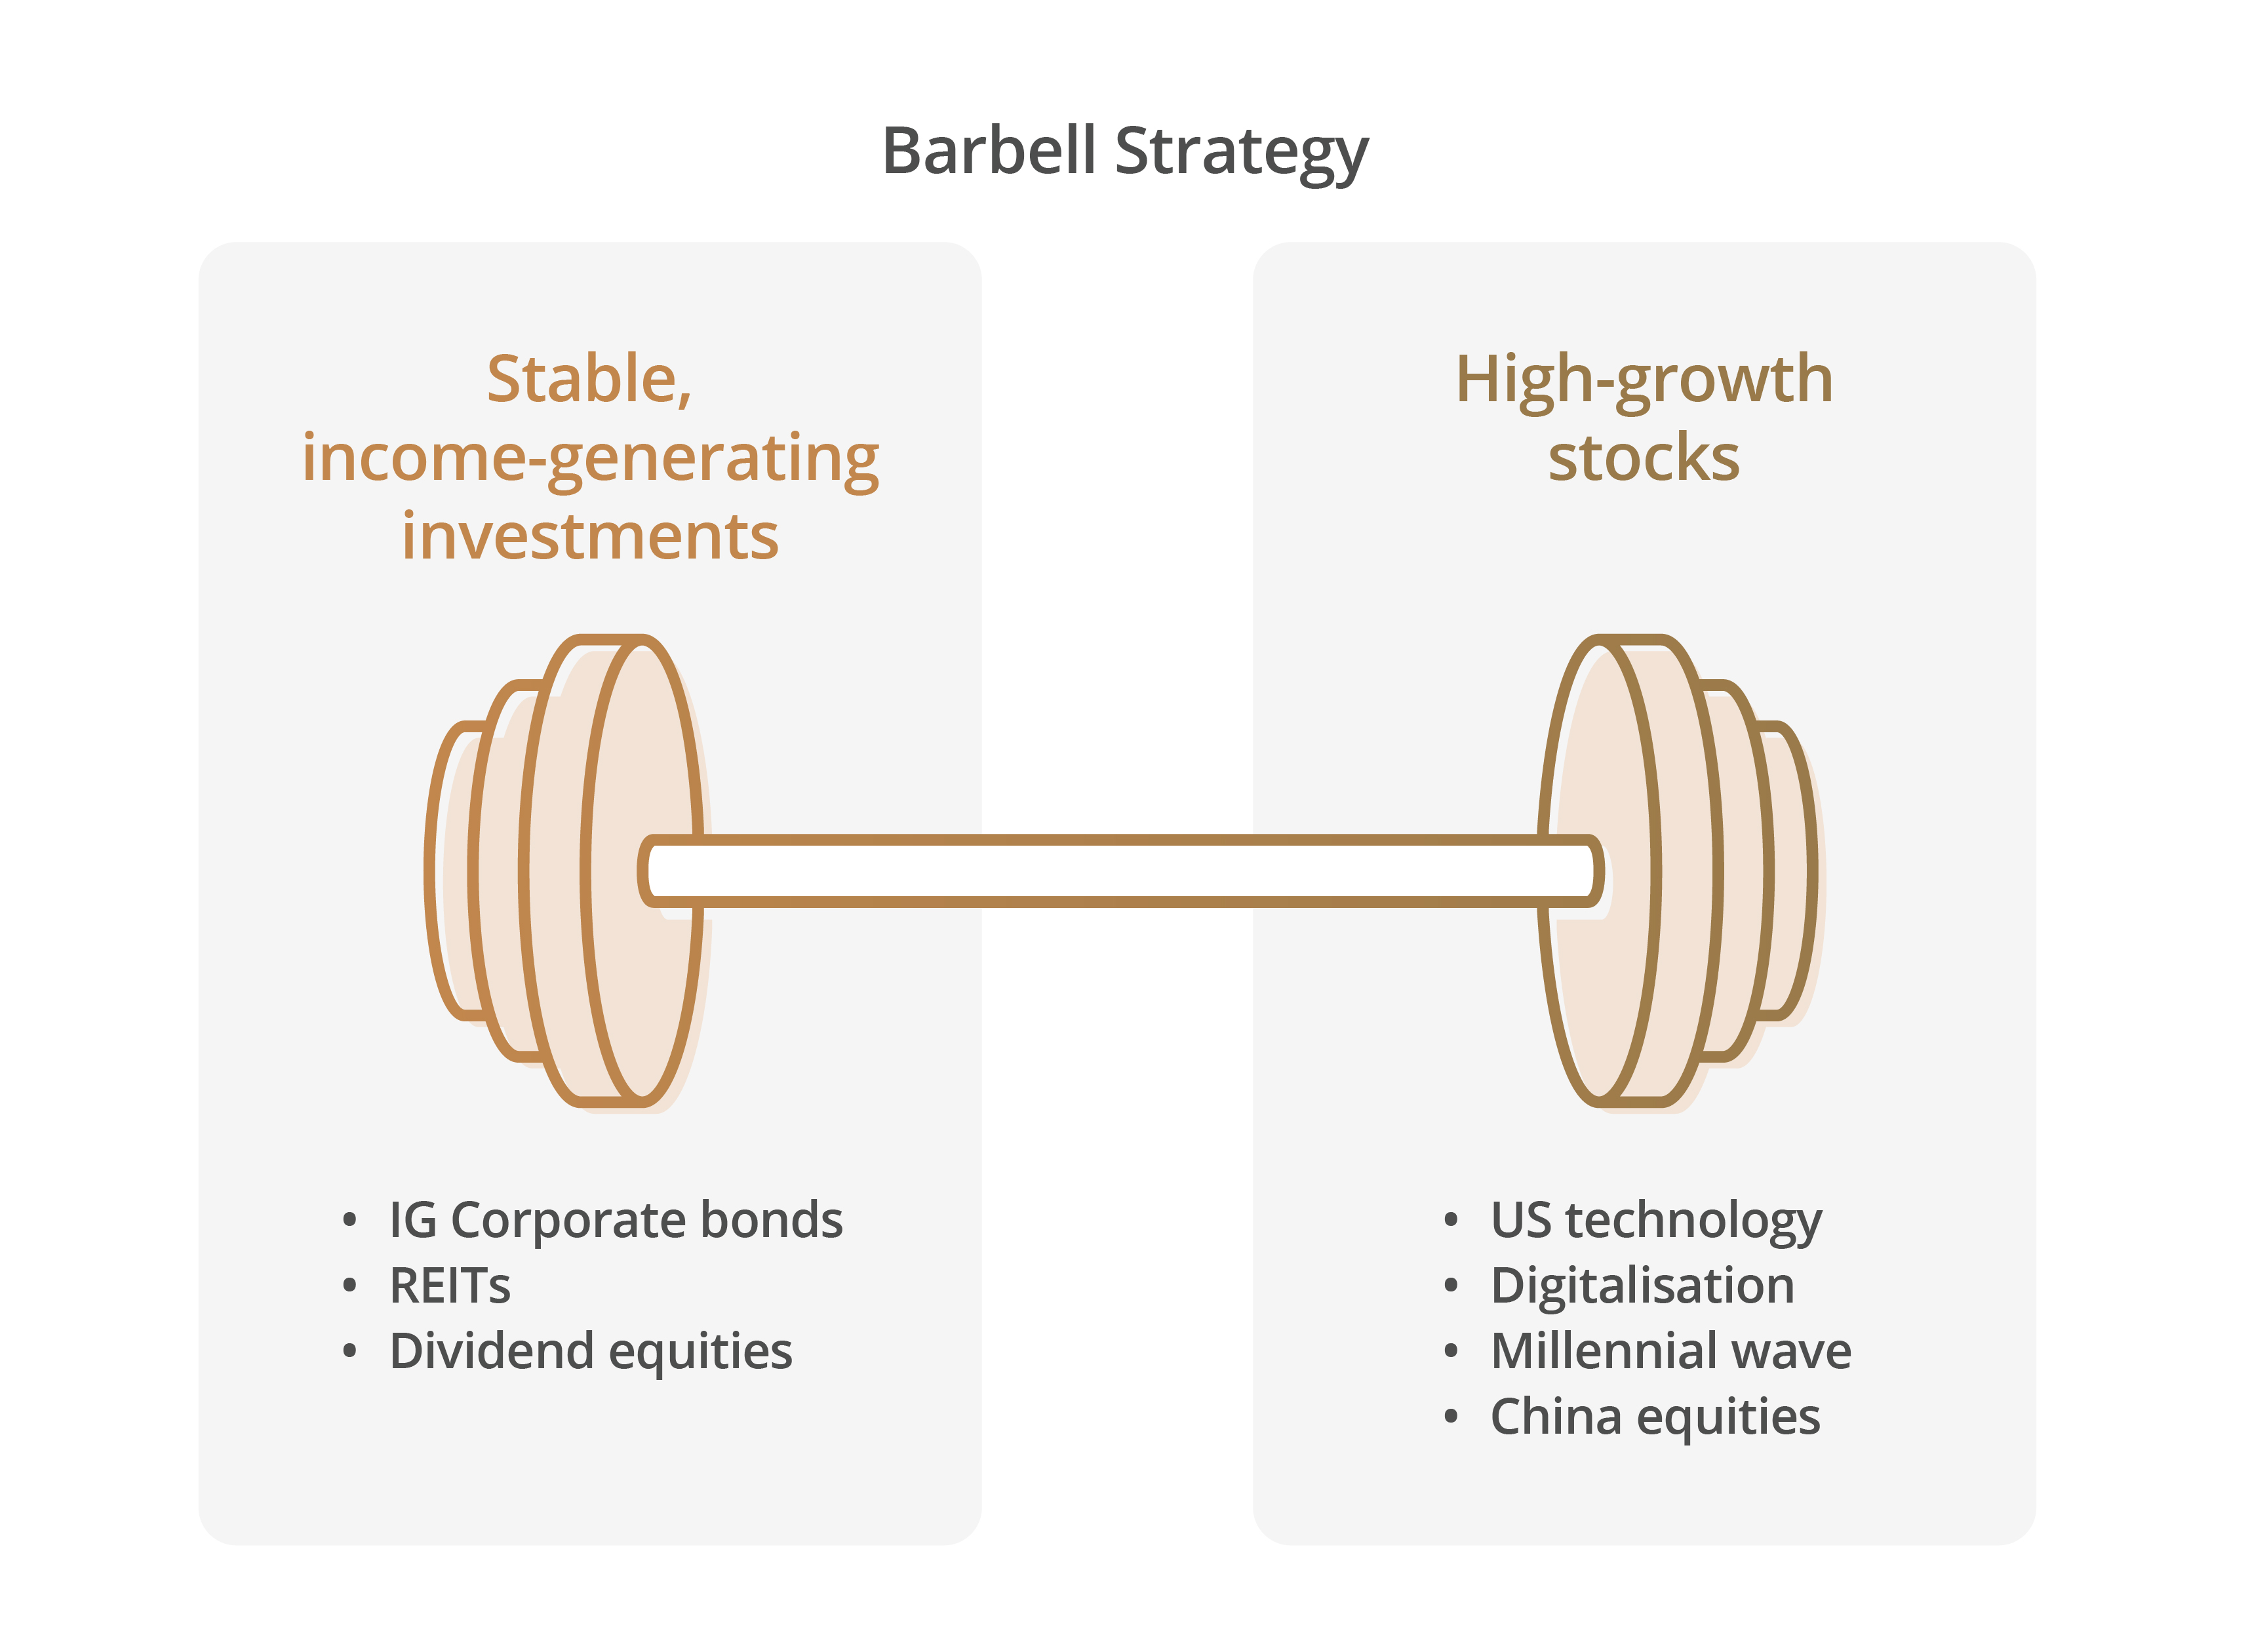 Barbell analogy, where one end denotes stable income-generating investments and the other denotes high-growth stocks. 